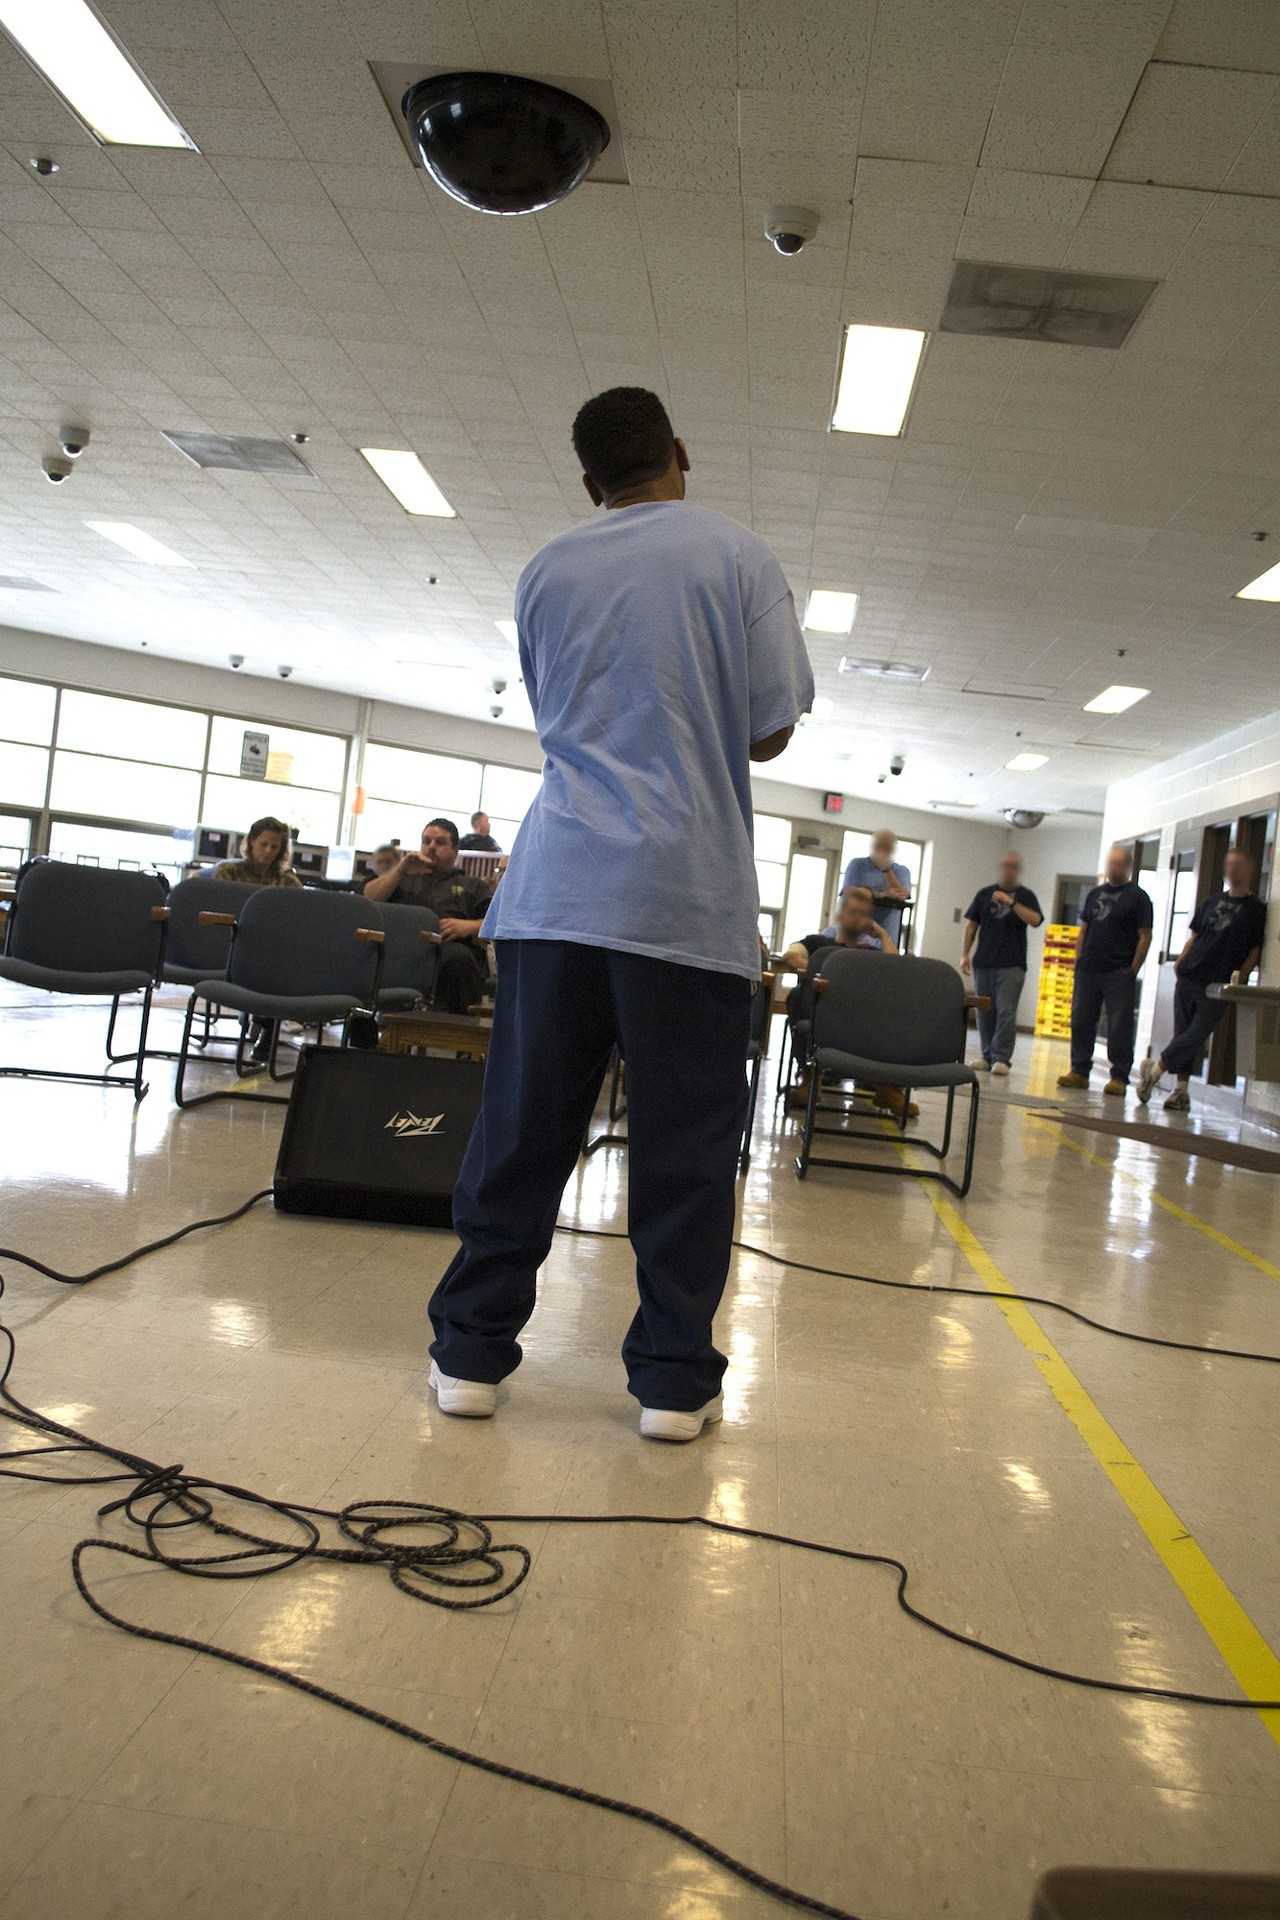 Read "Live From Trumbull Correctional: The Prison Bands Plugging In And Playing Behind Bars," by Eric Sandy.